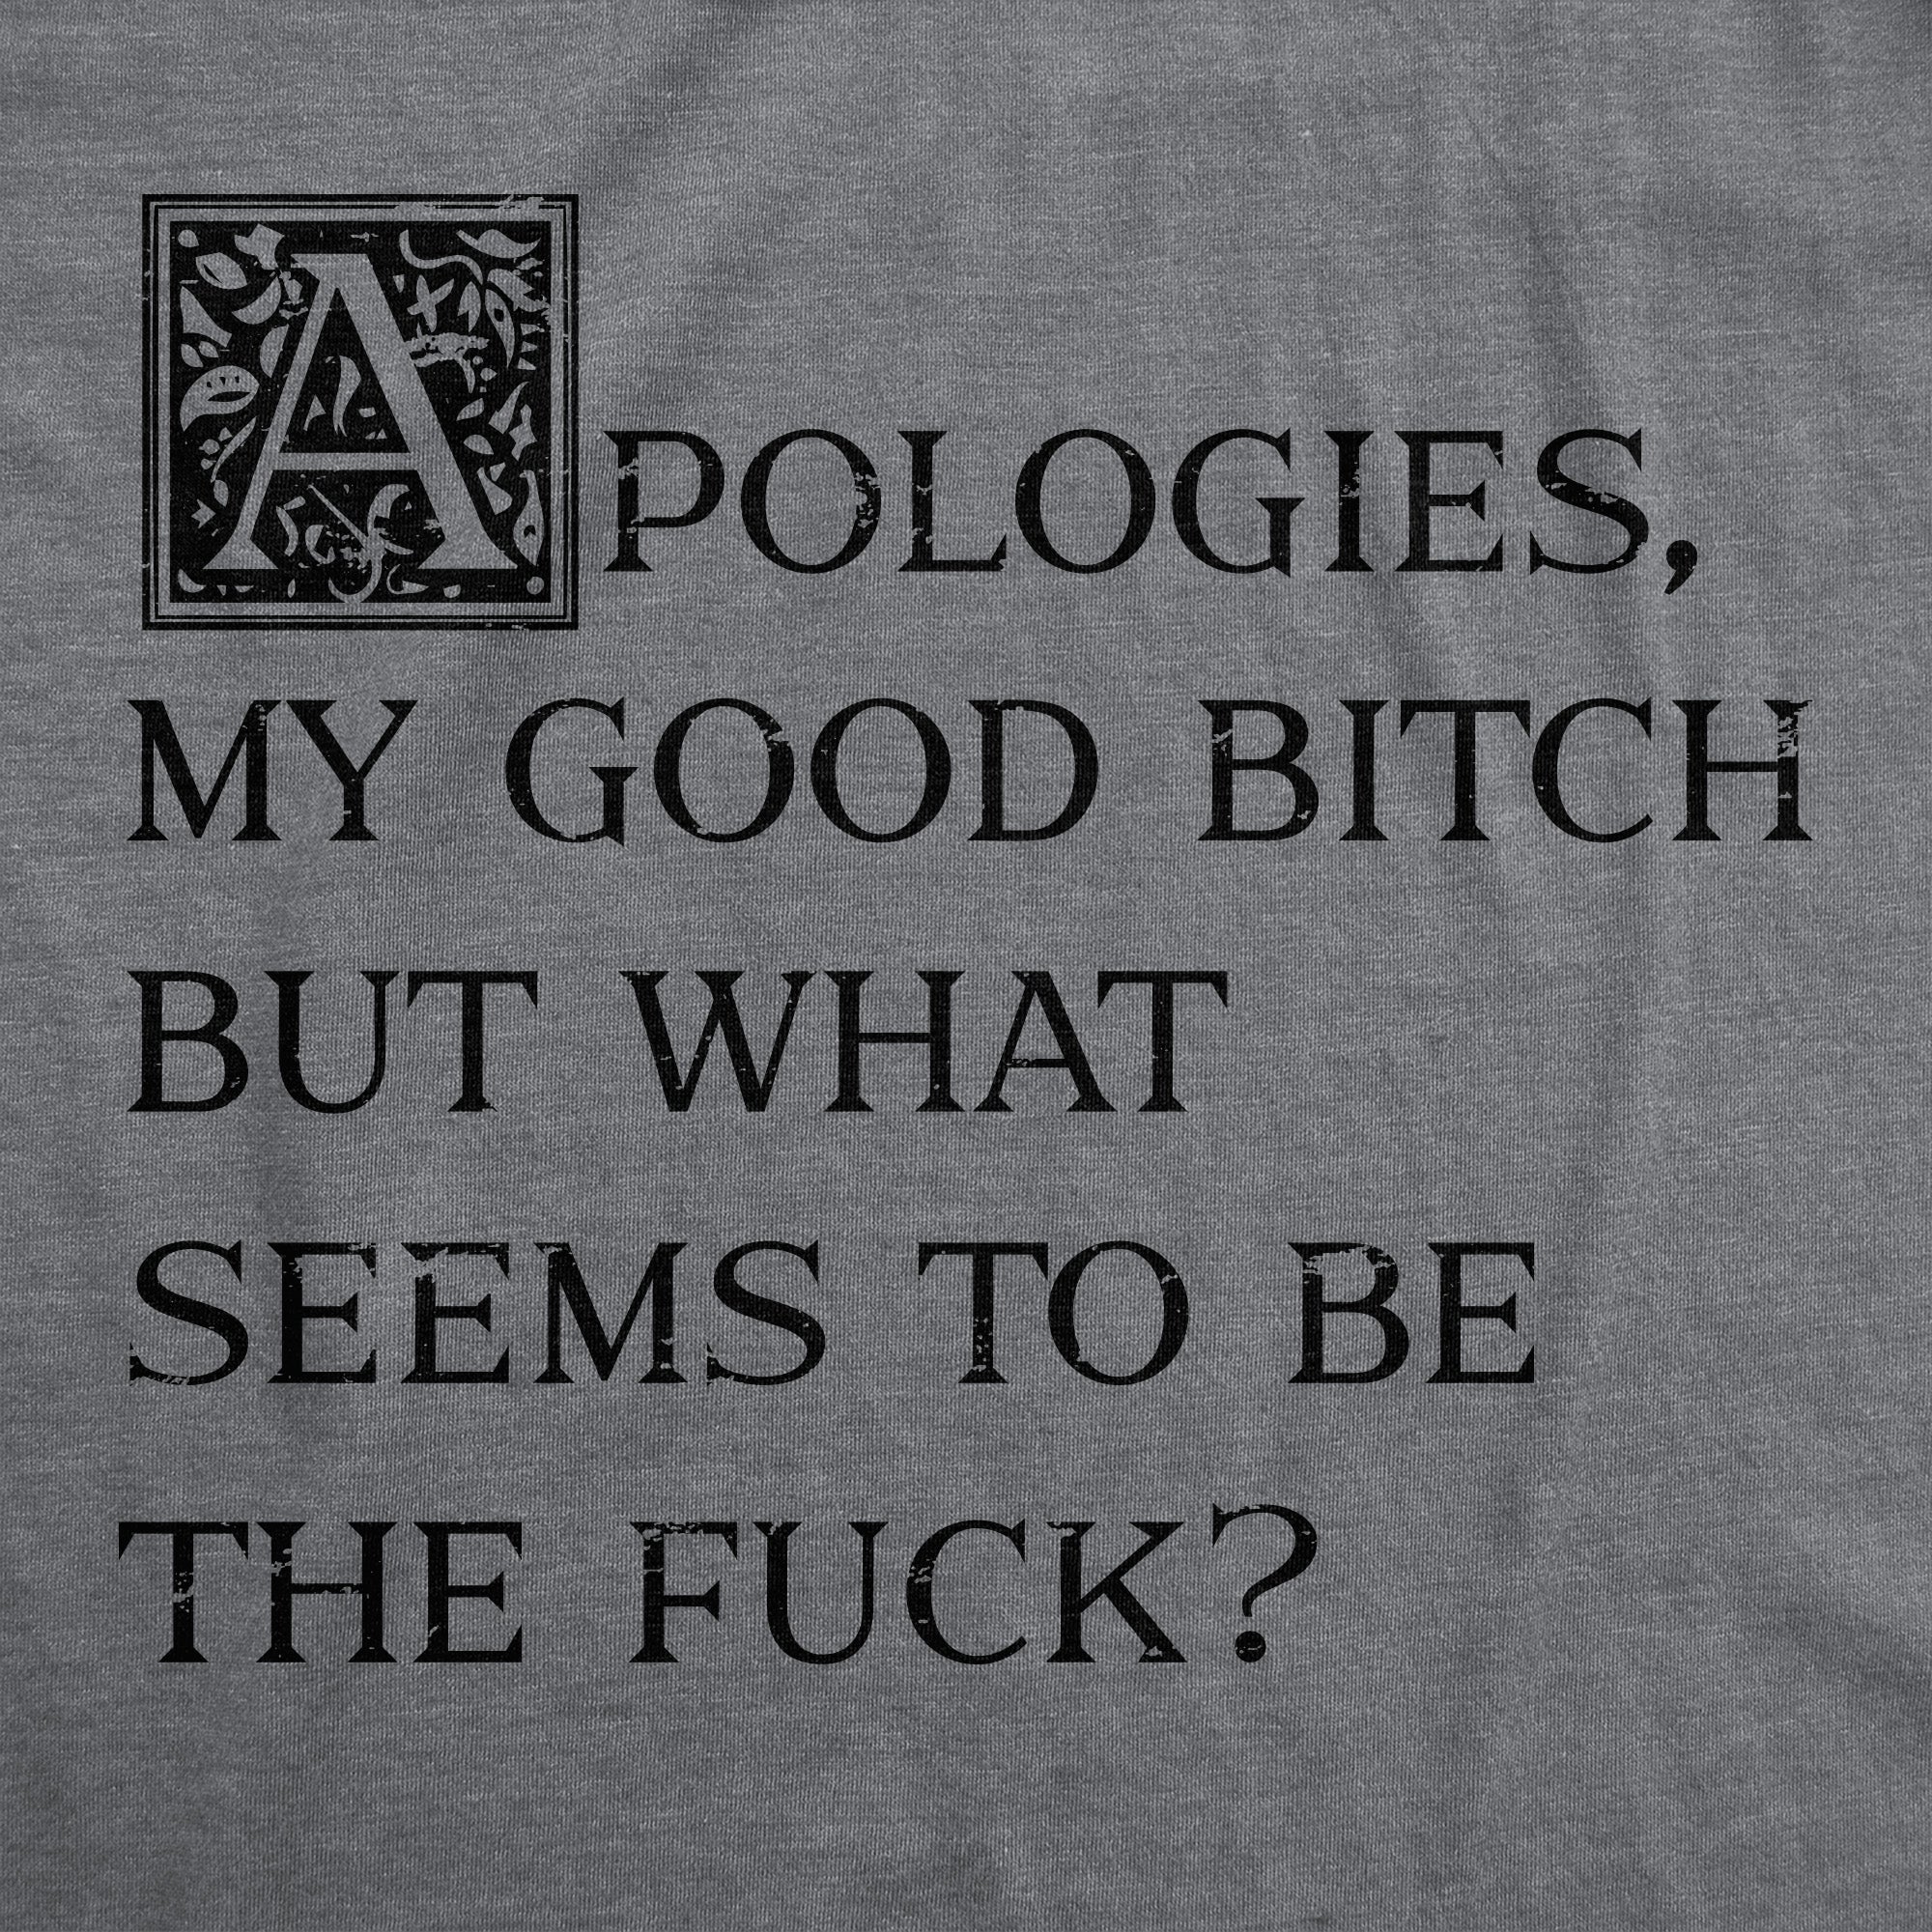 Funny Dark Heather Grey - FUCK Apologies My Good Bitch But What Seems To Be The Fuck Mens T Shirt Nerdy Sarcastic Tee